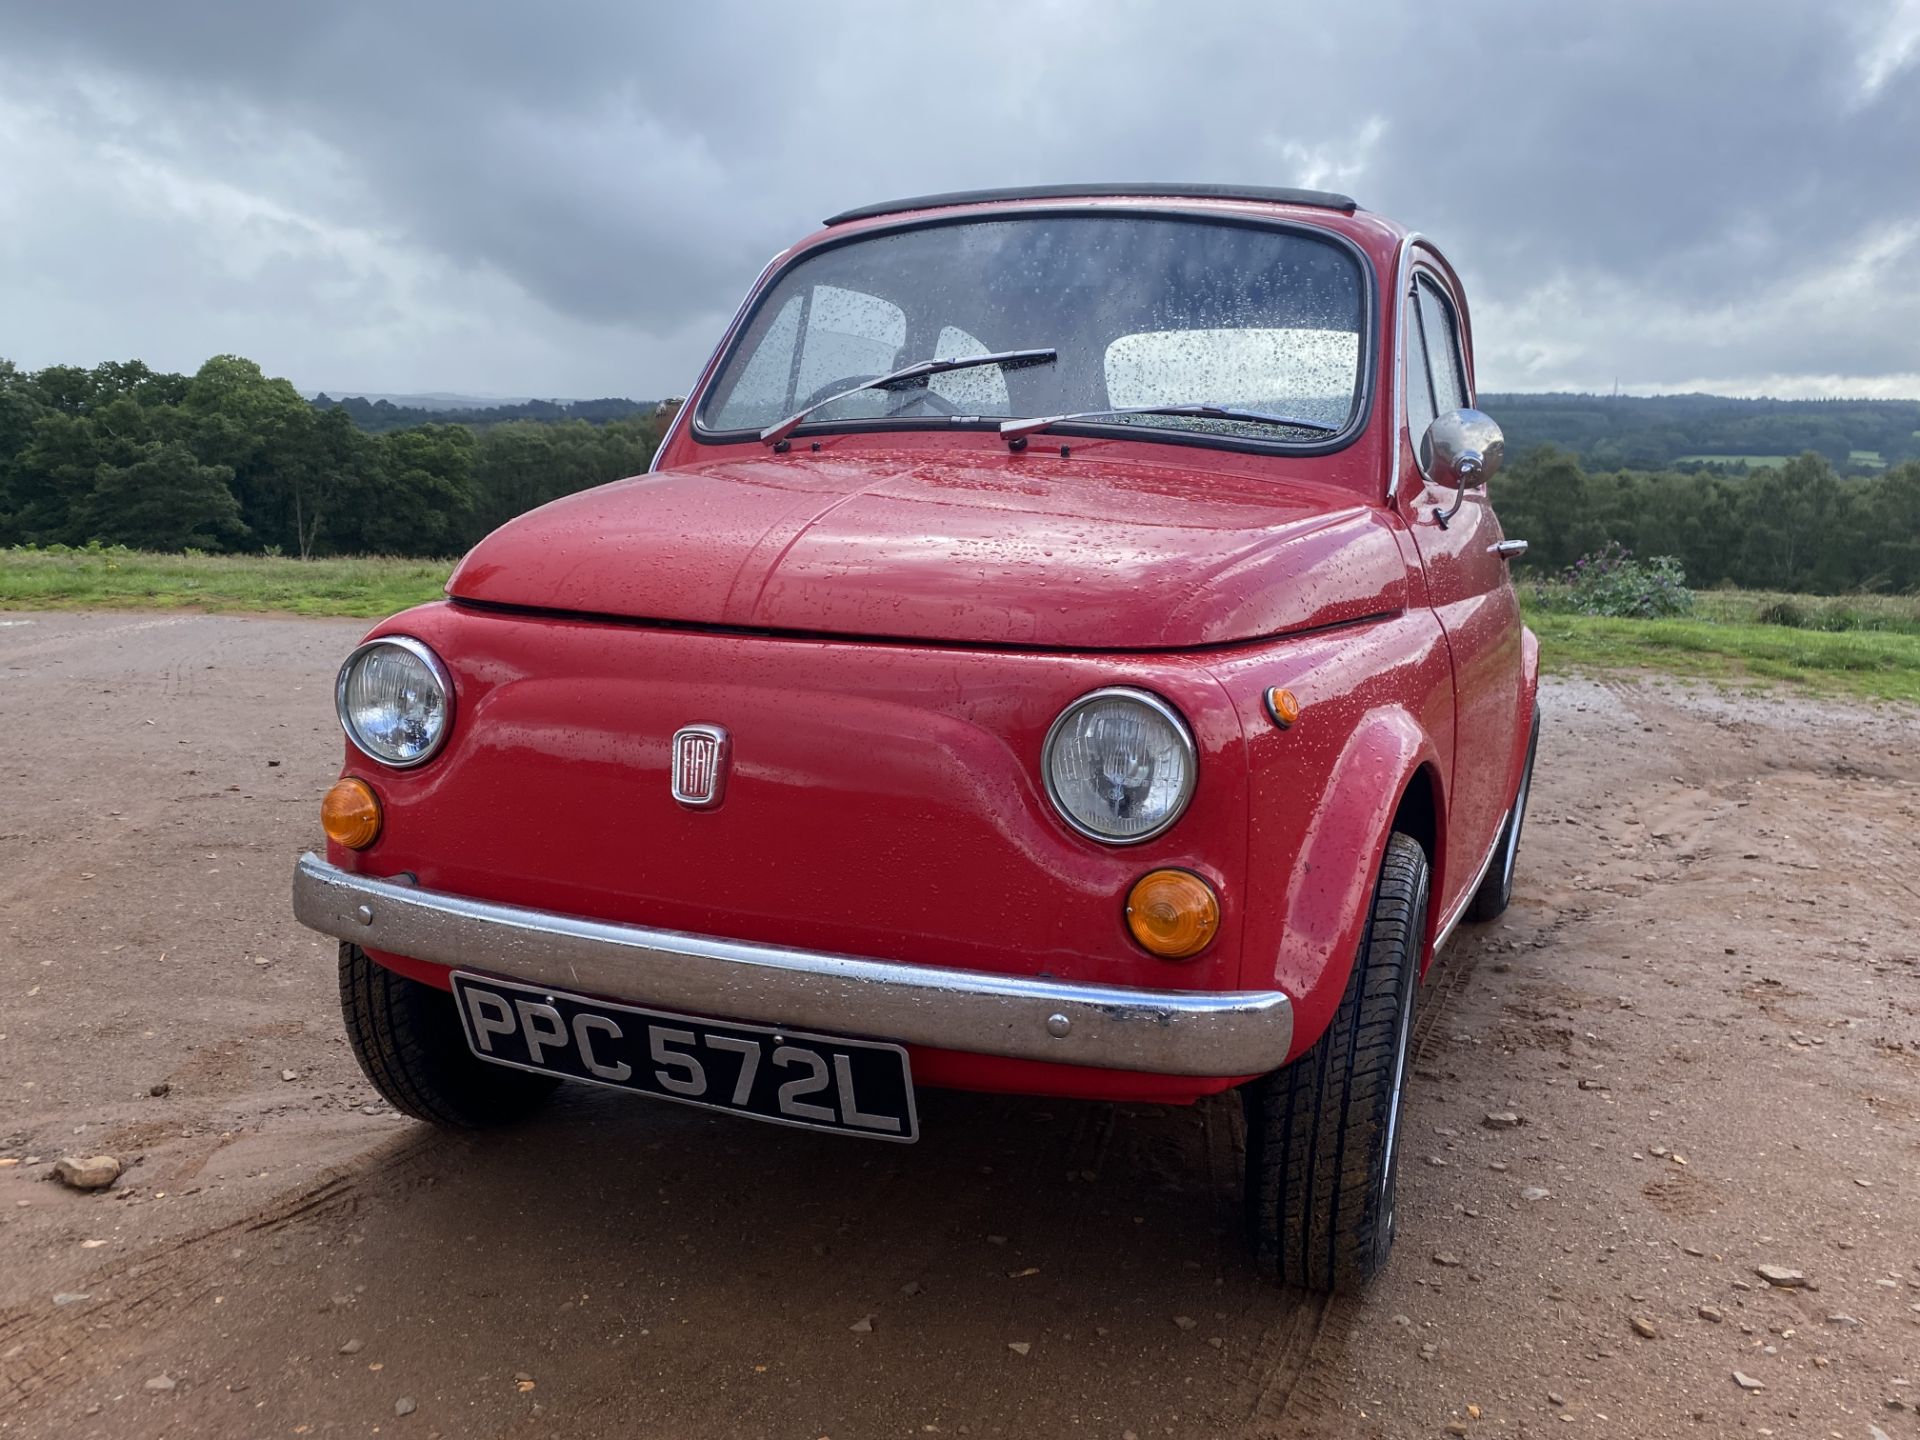 1973 Fiat 500 L. Registration number: PPC 572L.Mileage: 49,740.Lovely example of this iconic car.Fin